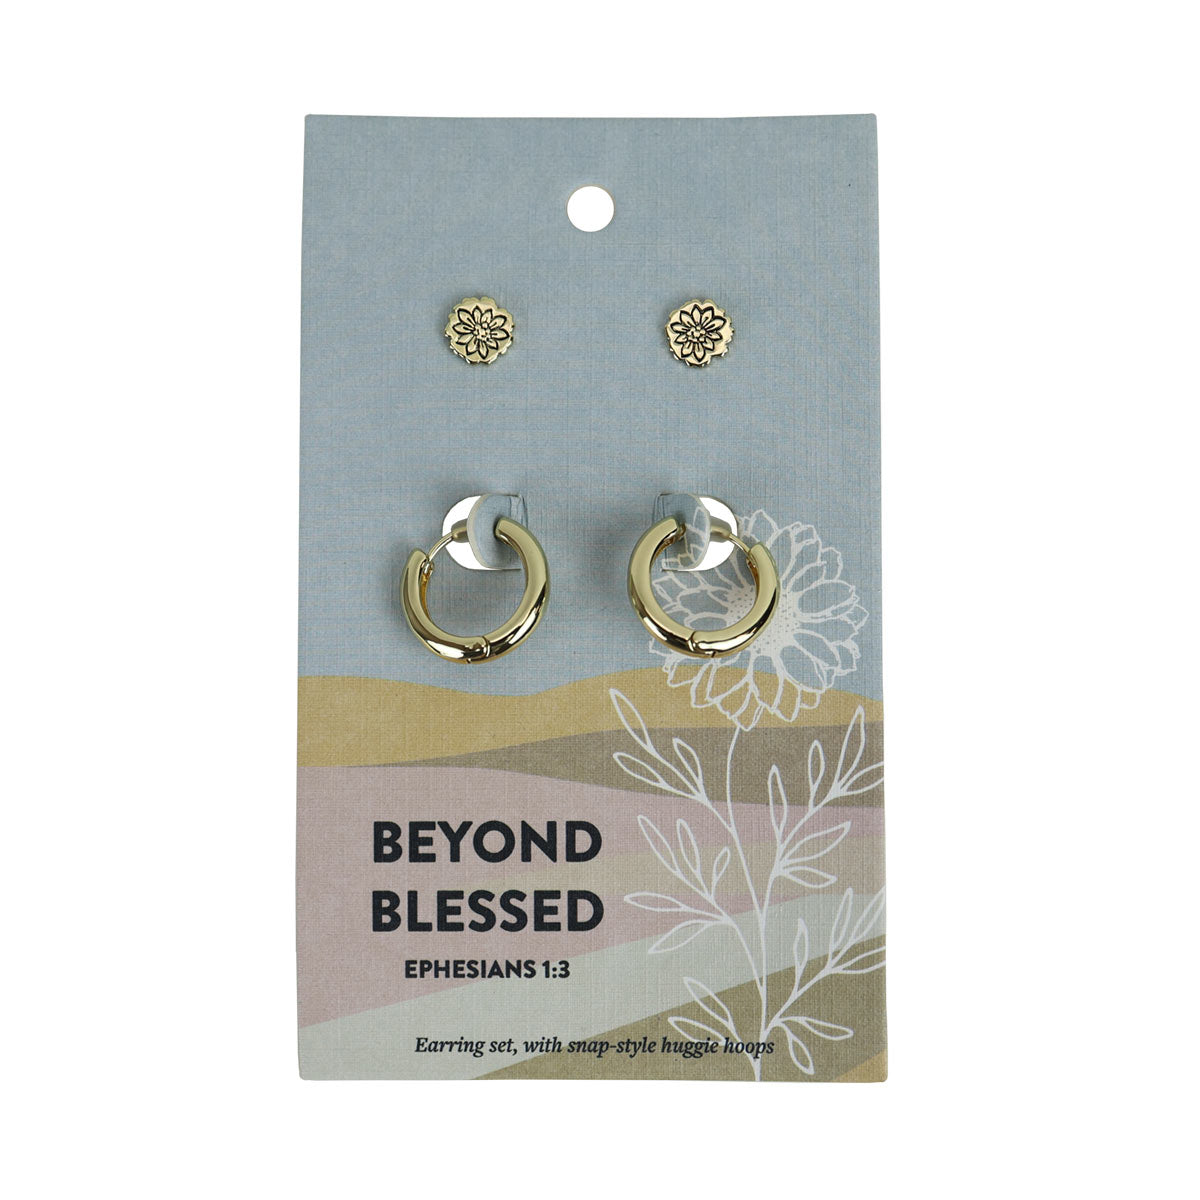 grace & truth Womens Earrings Beyond Blessed